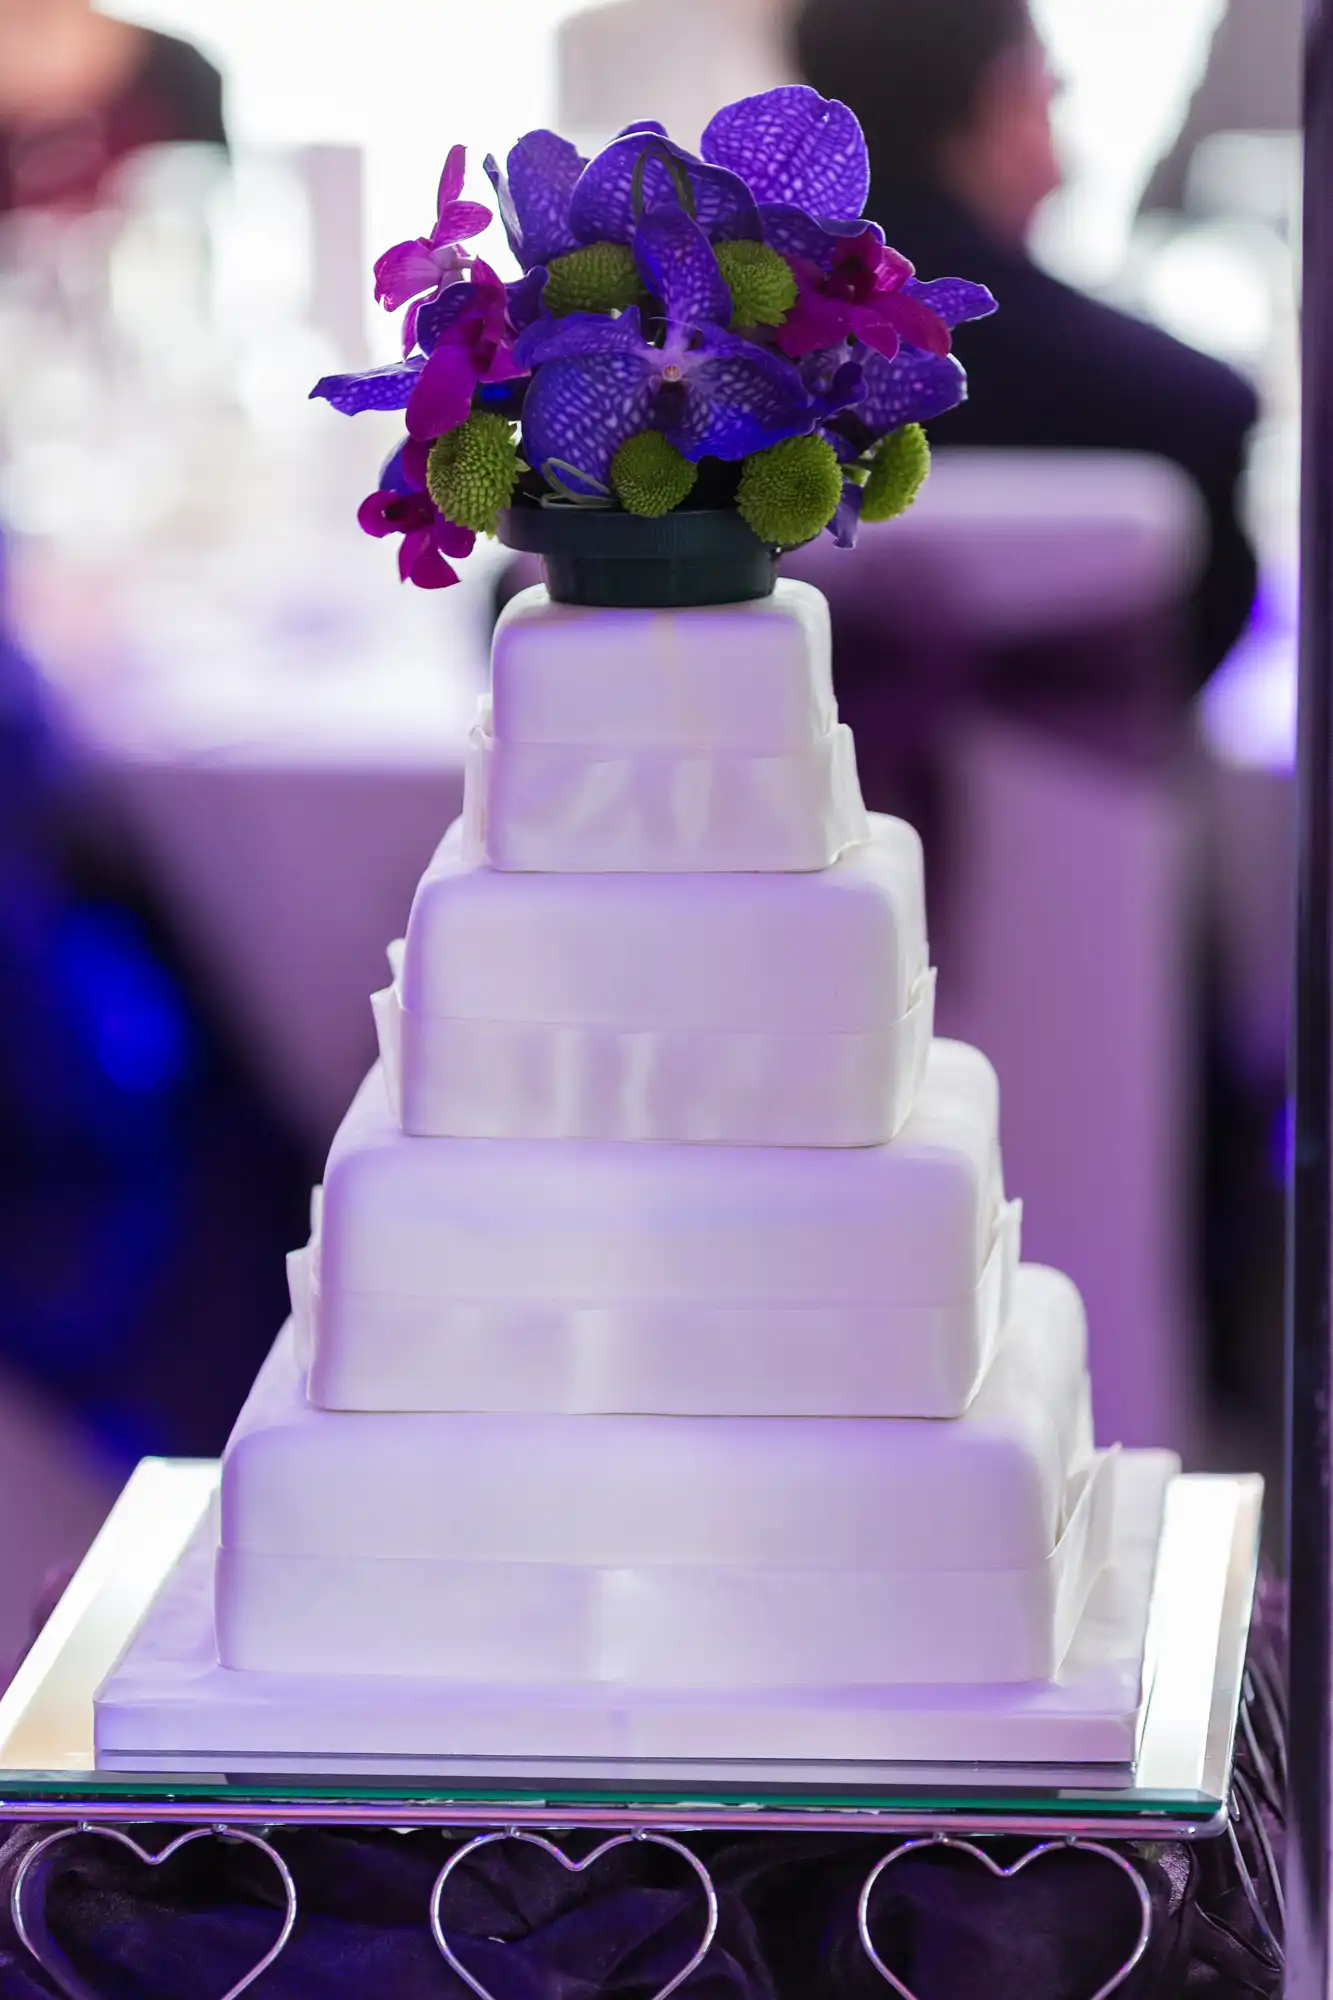 A white multi-tiered wedding cake topped with a bouquet of purple orchids and green blooms, displayed at an indoor event.